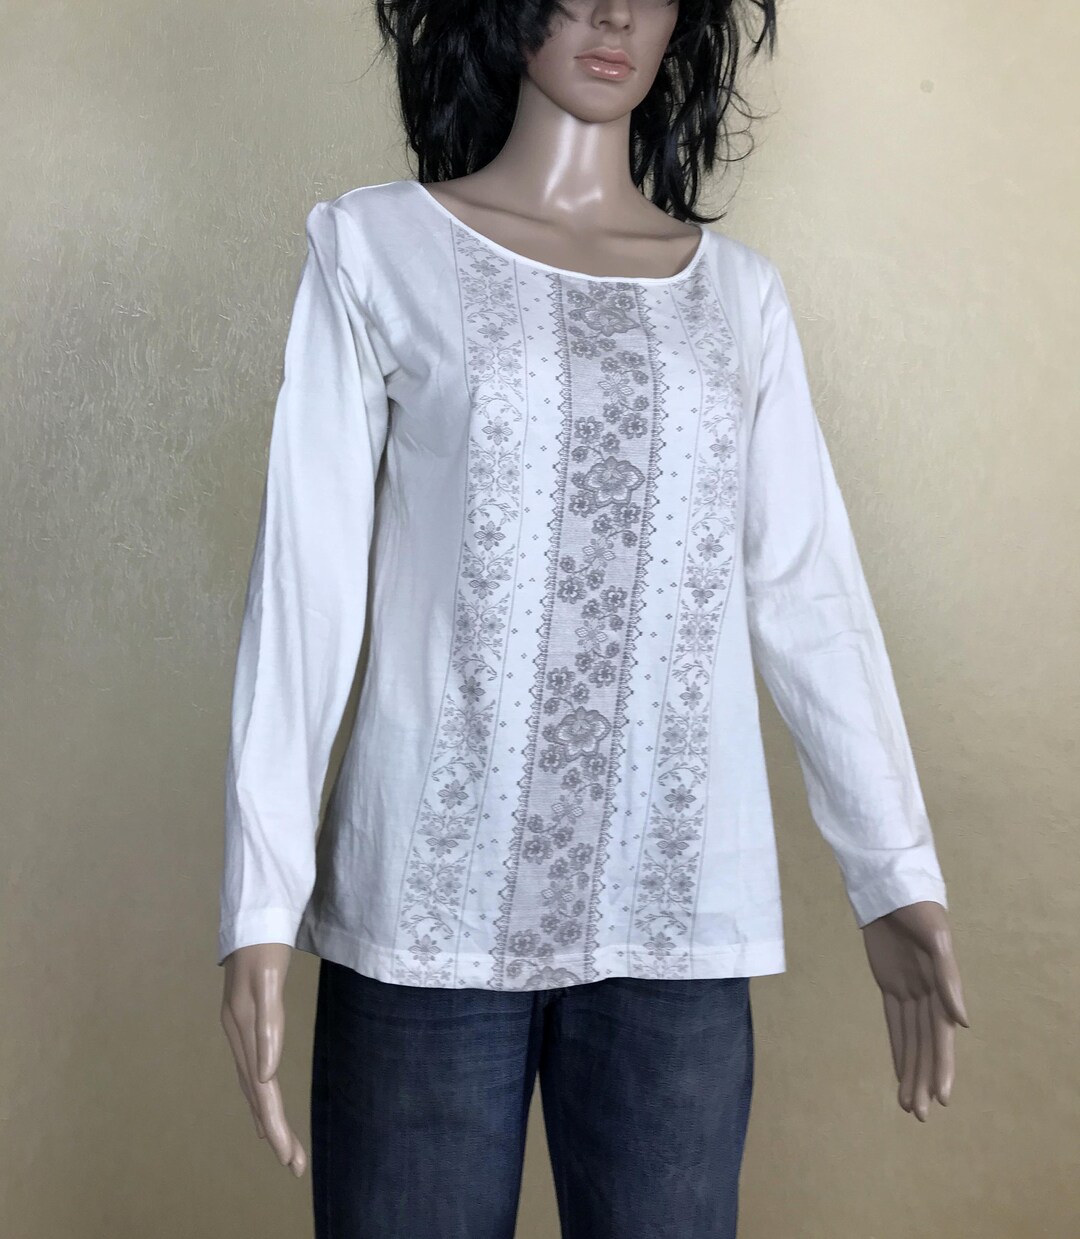 Women's Floral Cotton Blouse Round Neck Long Sleeve Top - Etsy